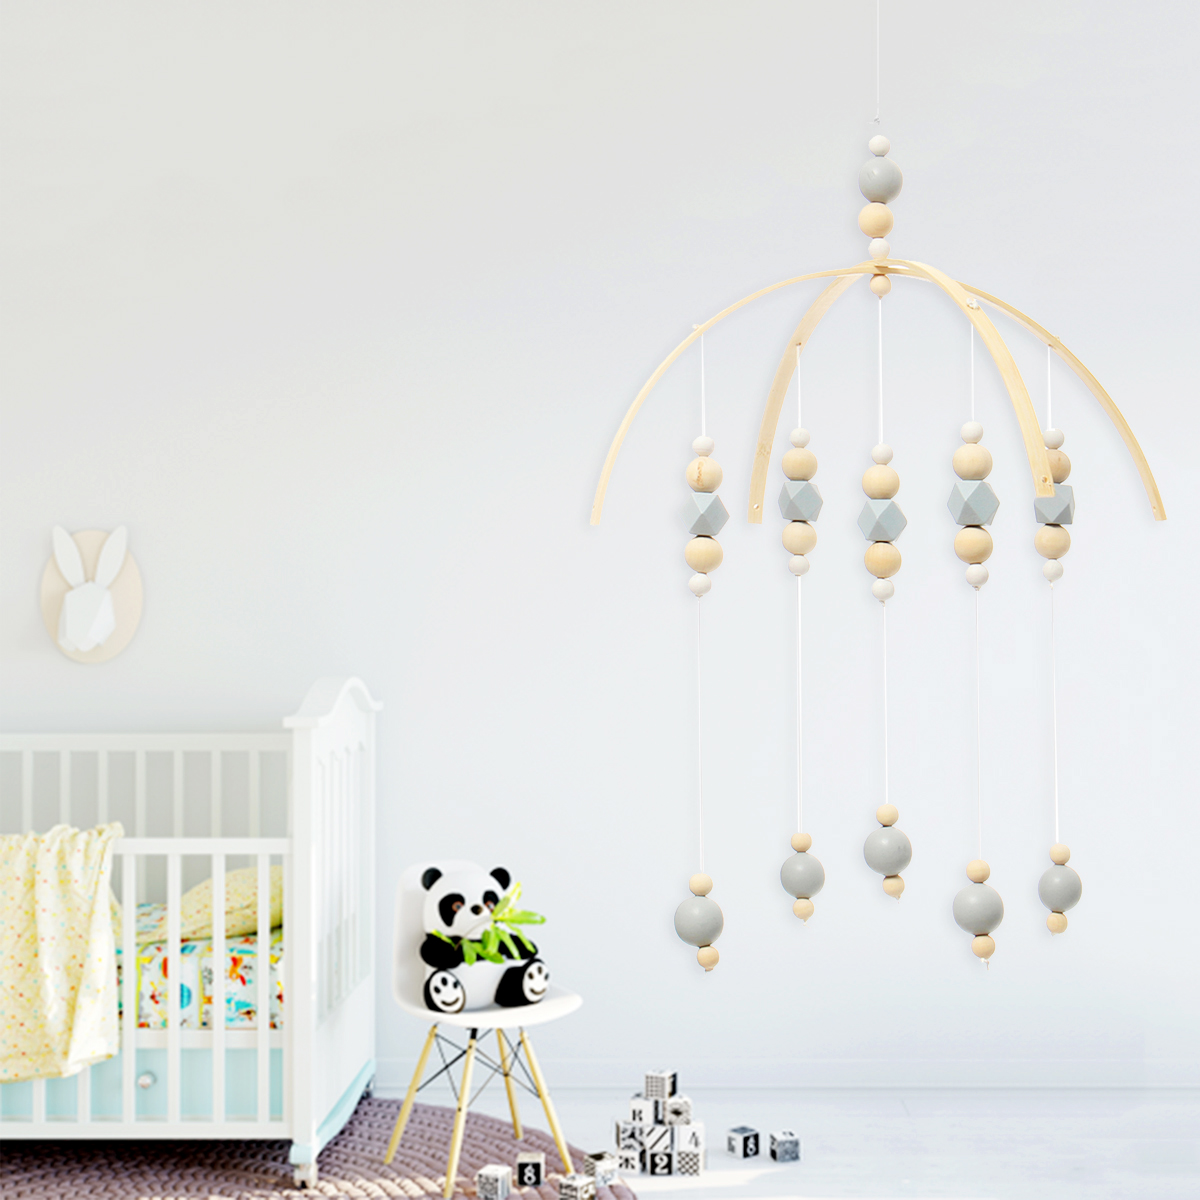 Wooden-Beads-Wind-Chimes-with-Wool-Balls-Baby-Bed-Hanging-Windbell-Crib-Tent-Kids-Room-Decorations-O-1906546-11